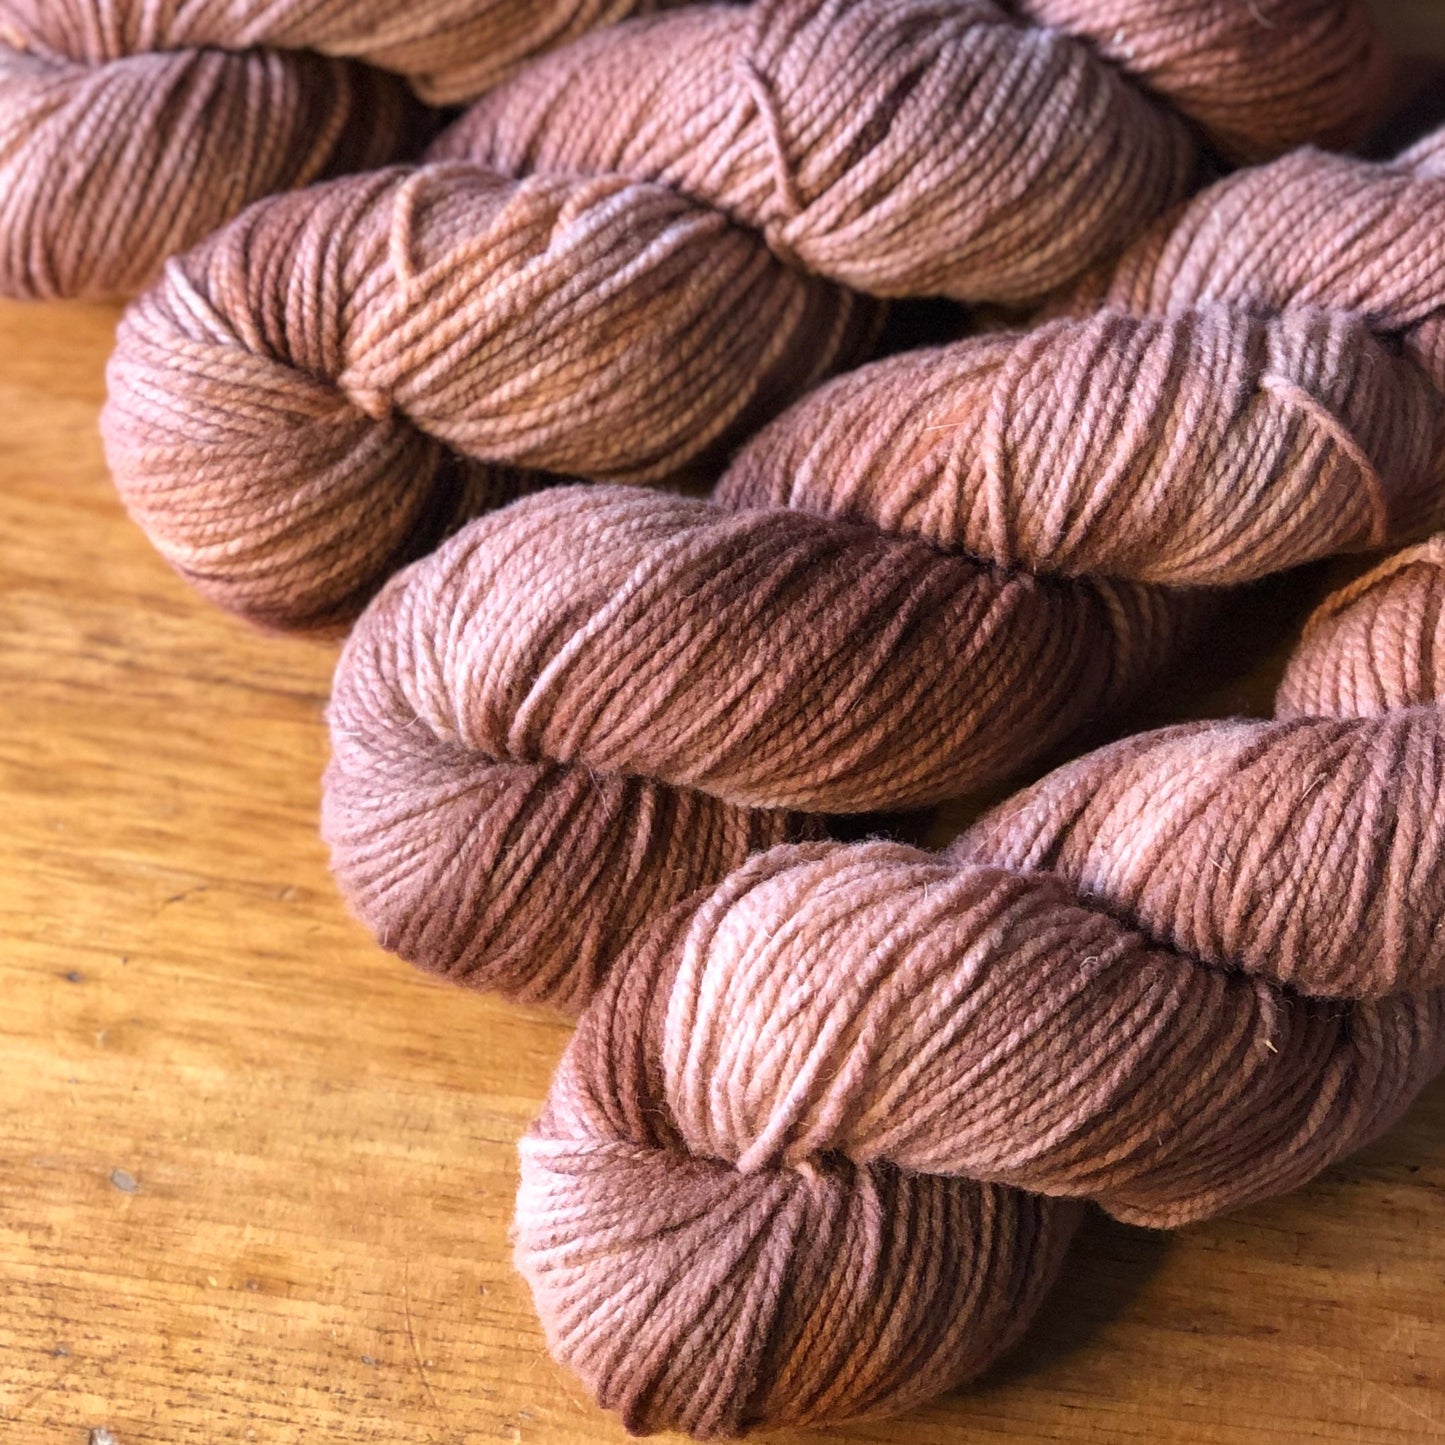 Worsted Weight (4) Yarn, 100% Wool, Hand Dyed "Pumpkin Spice" Colourway